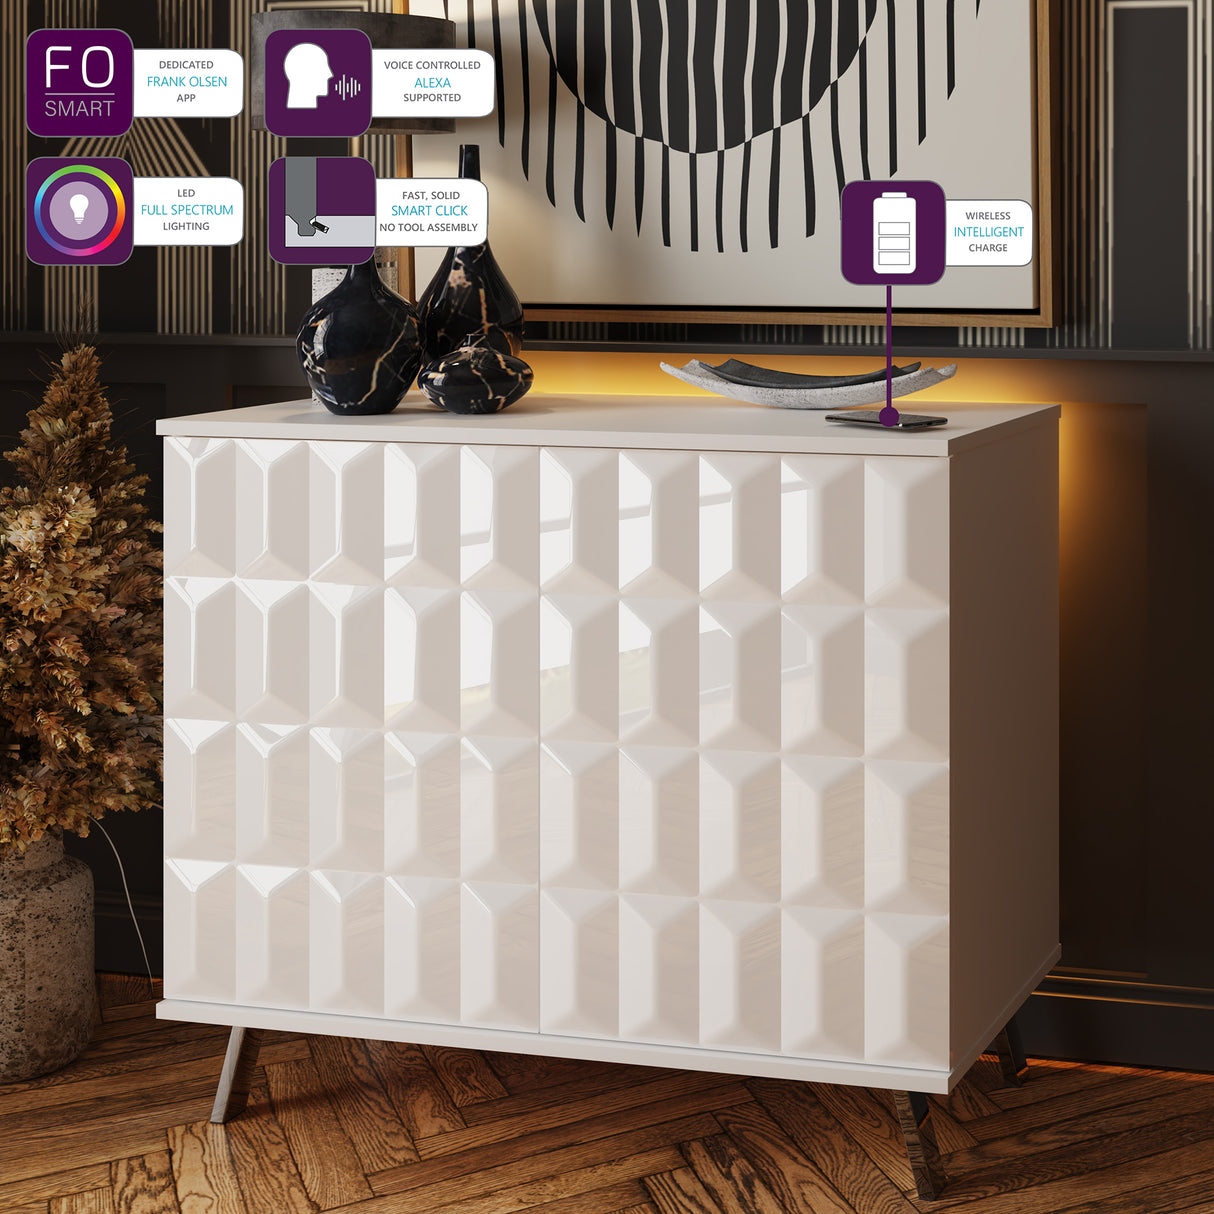 Frank Olsen Elevate White Small Sideboard with Mood Lighting & Wireless Phone Charging